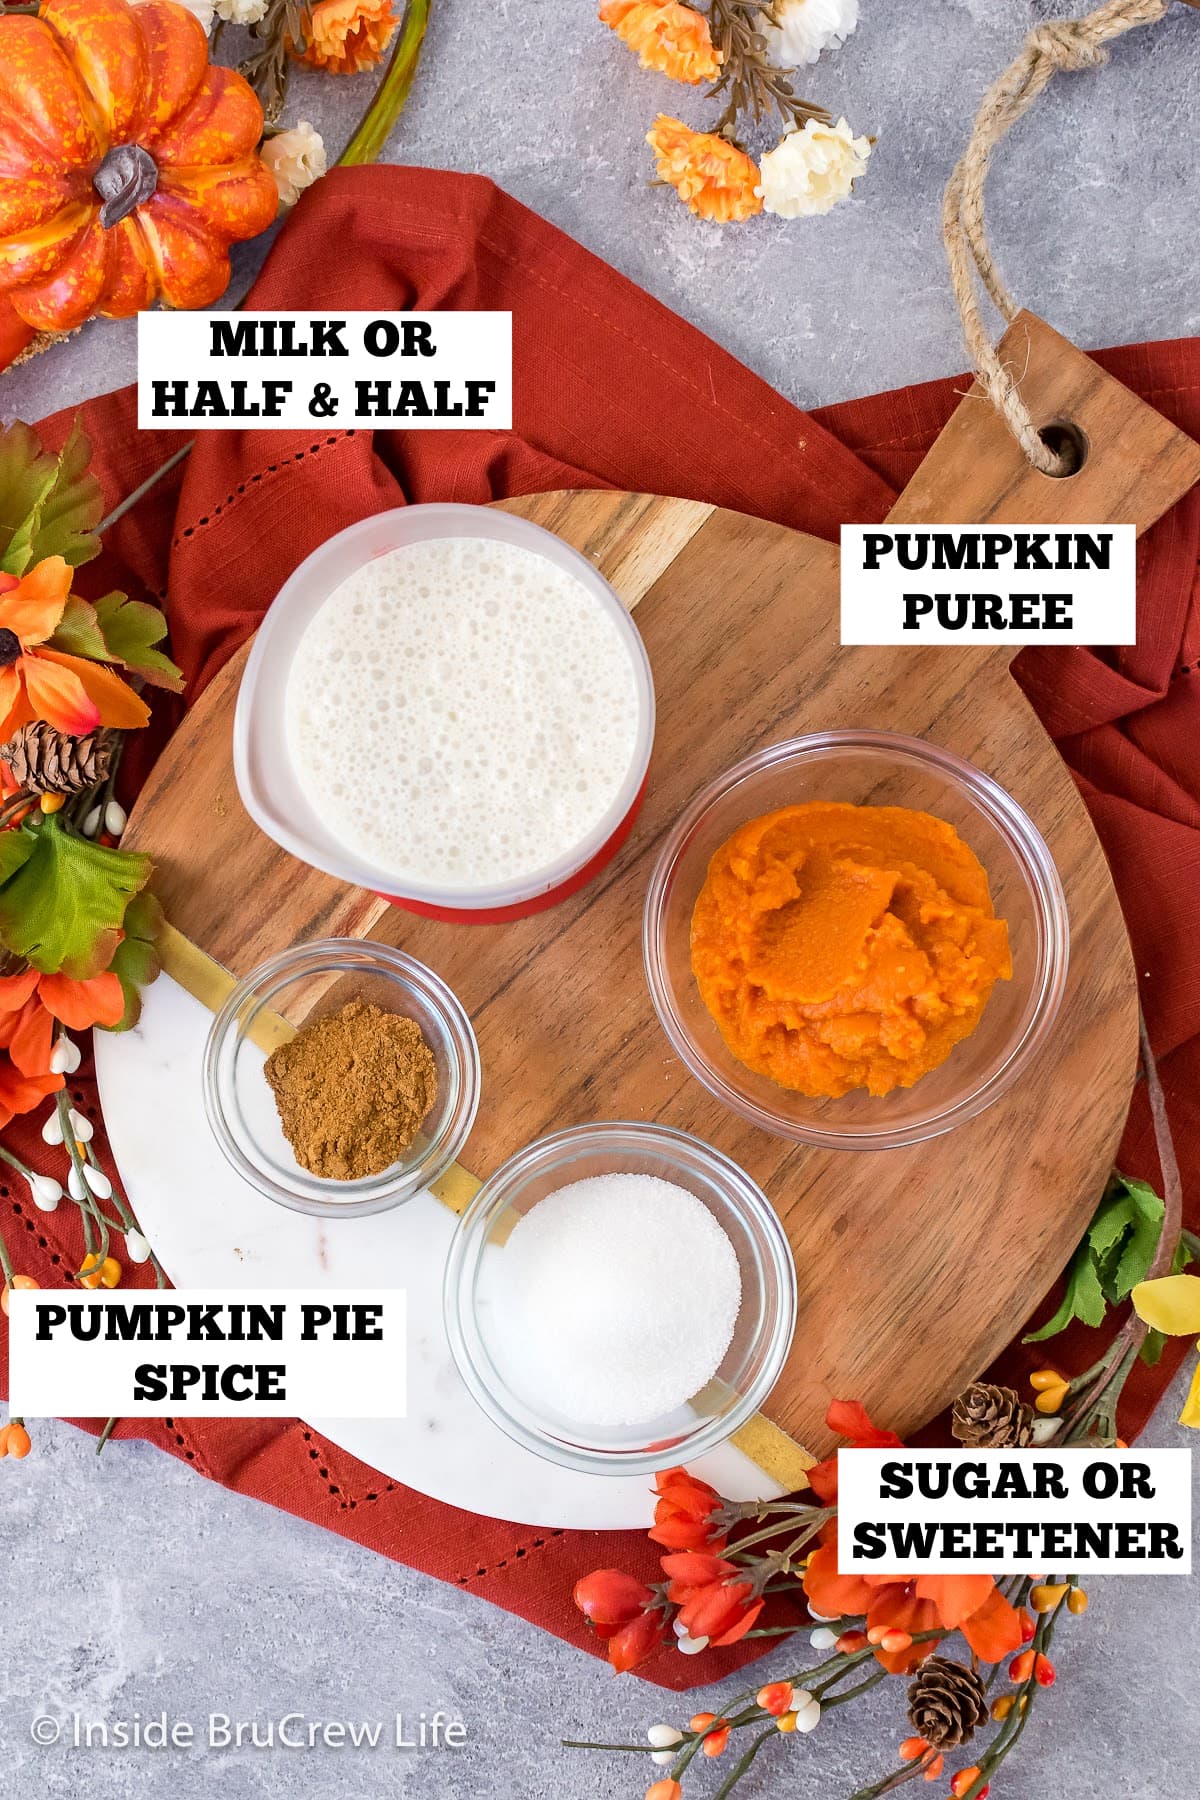 Bowls of ingredients needed to make pumpkin cold foam.